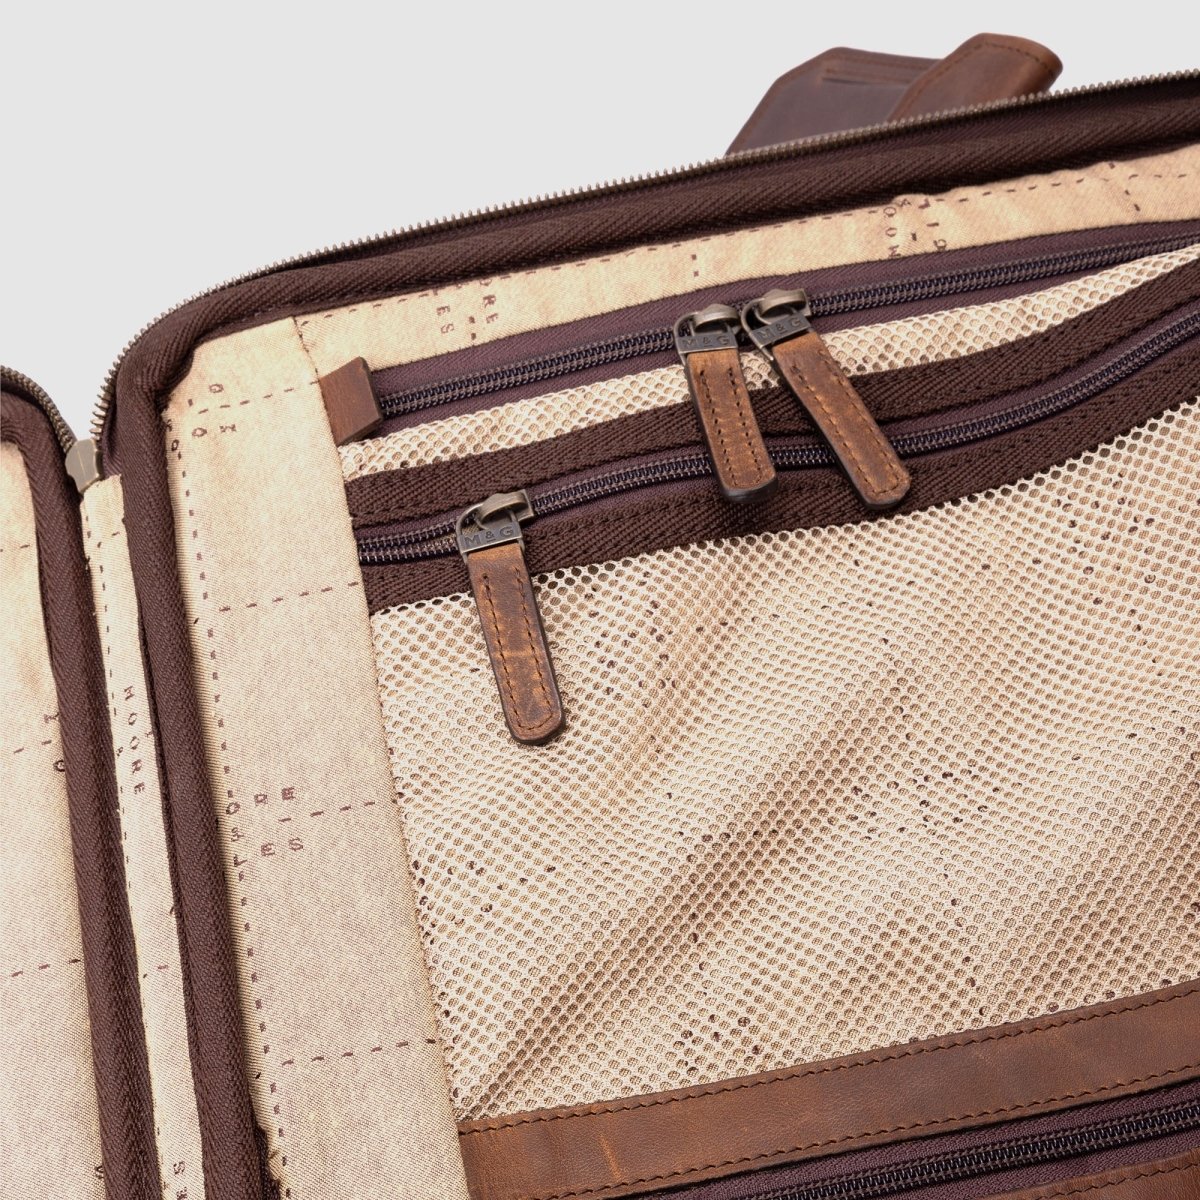 Your new favorite companion for organization and style: the Parker